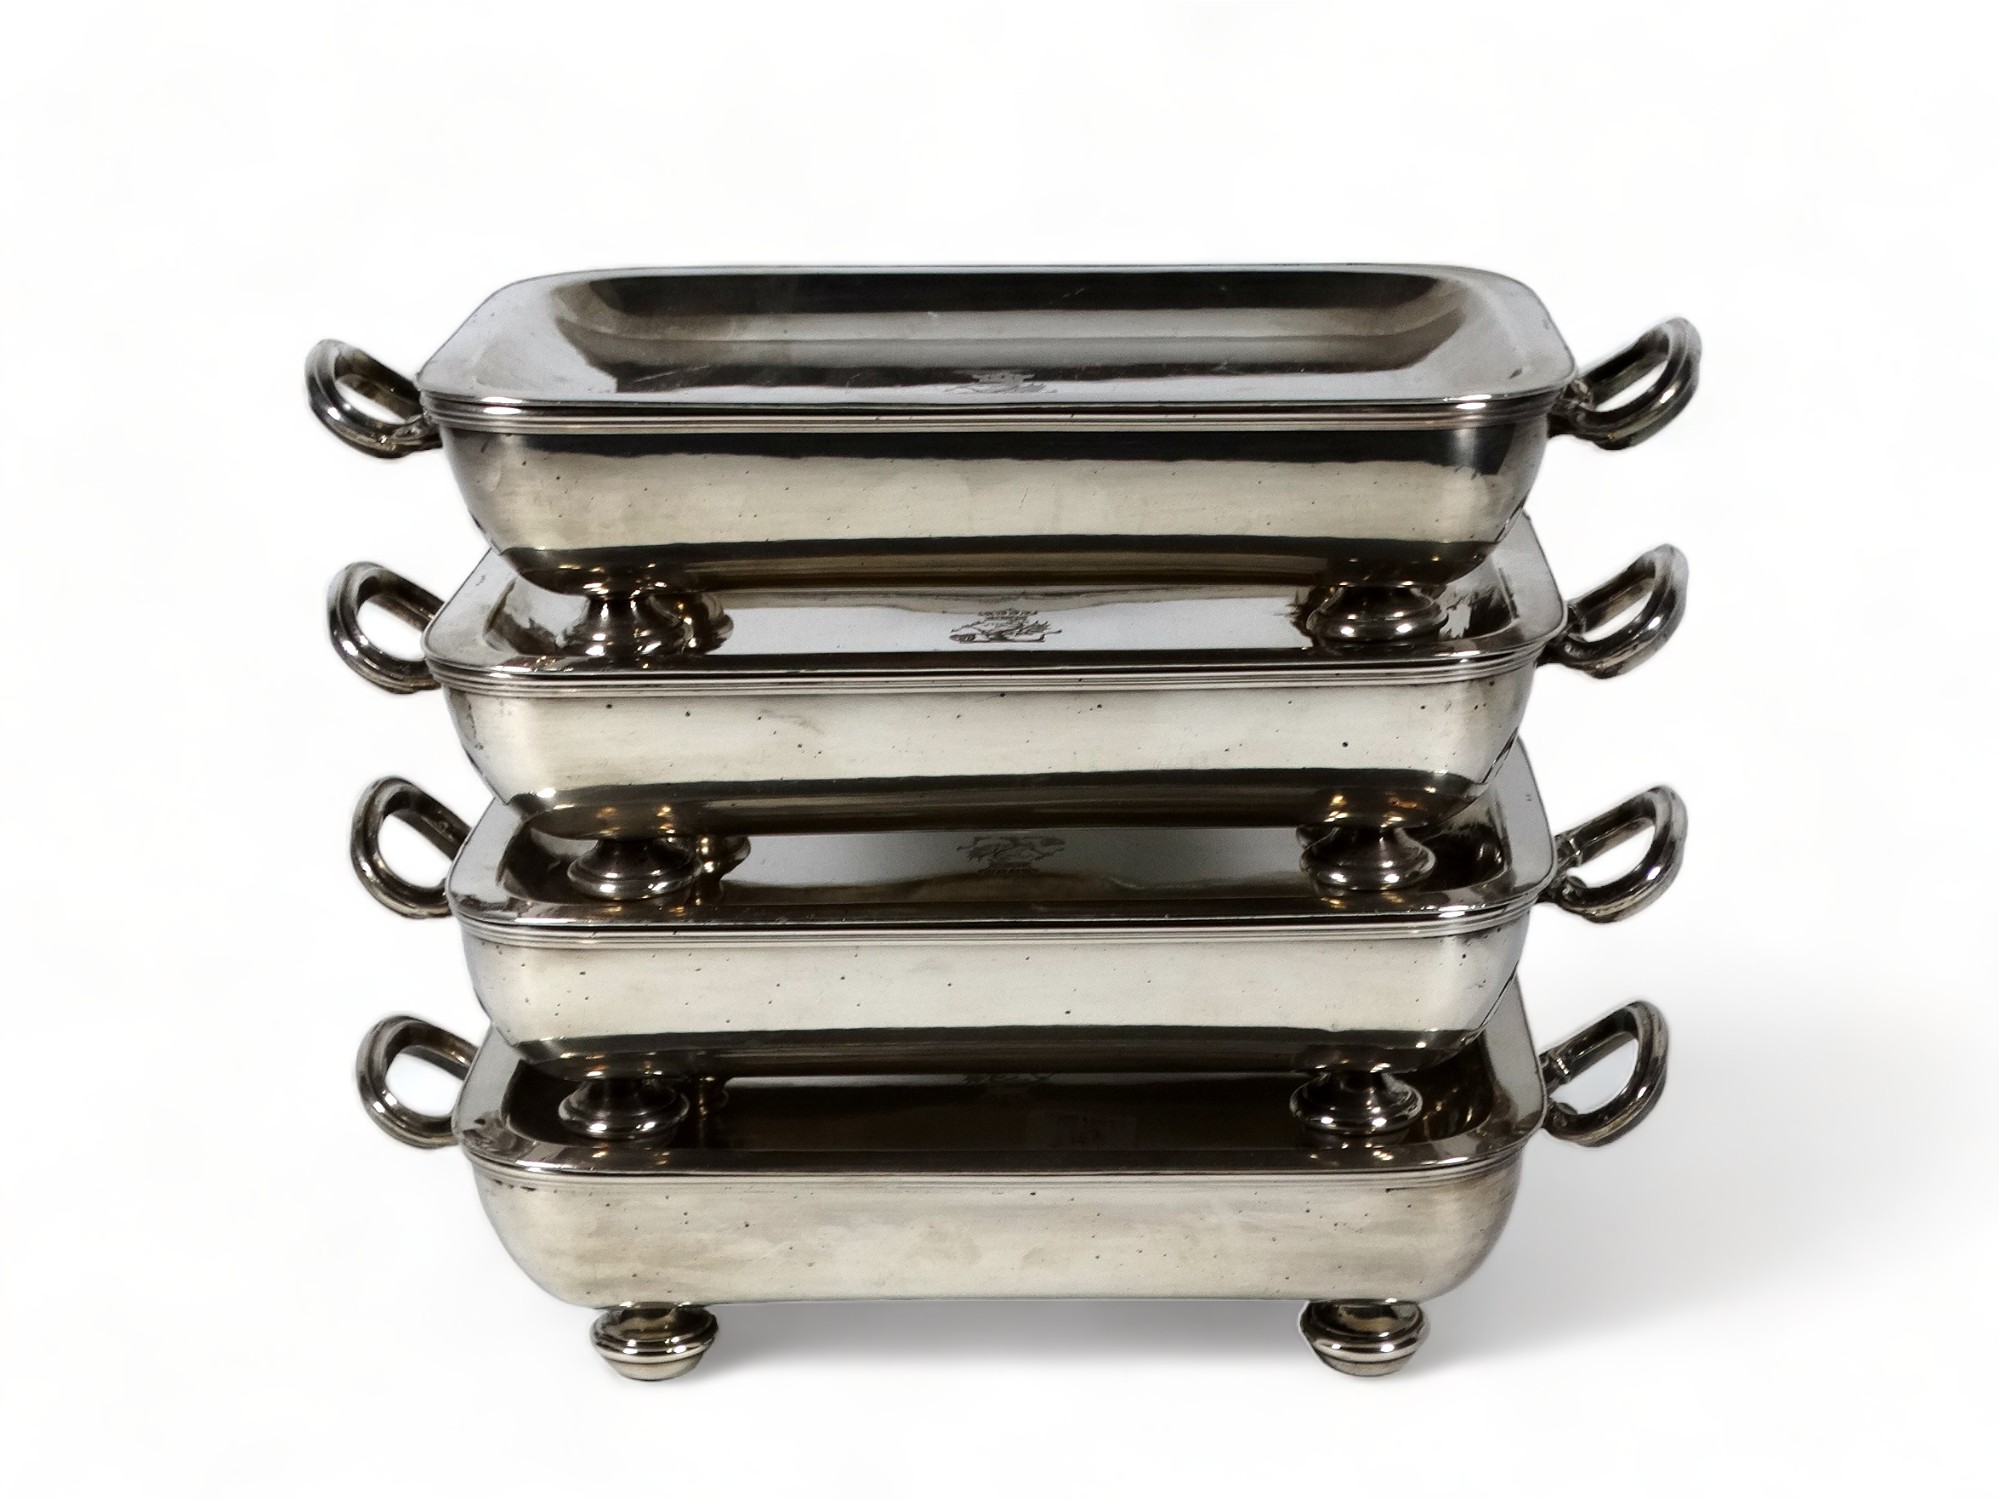 A set of four silver plated rectangular food warmers - dish shaped and engraved with armorial,